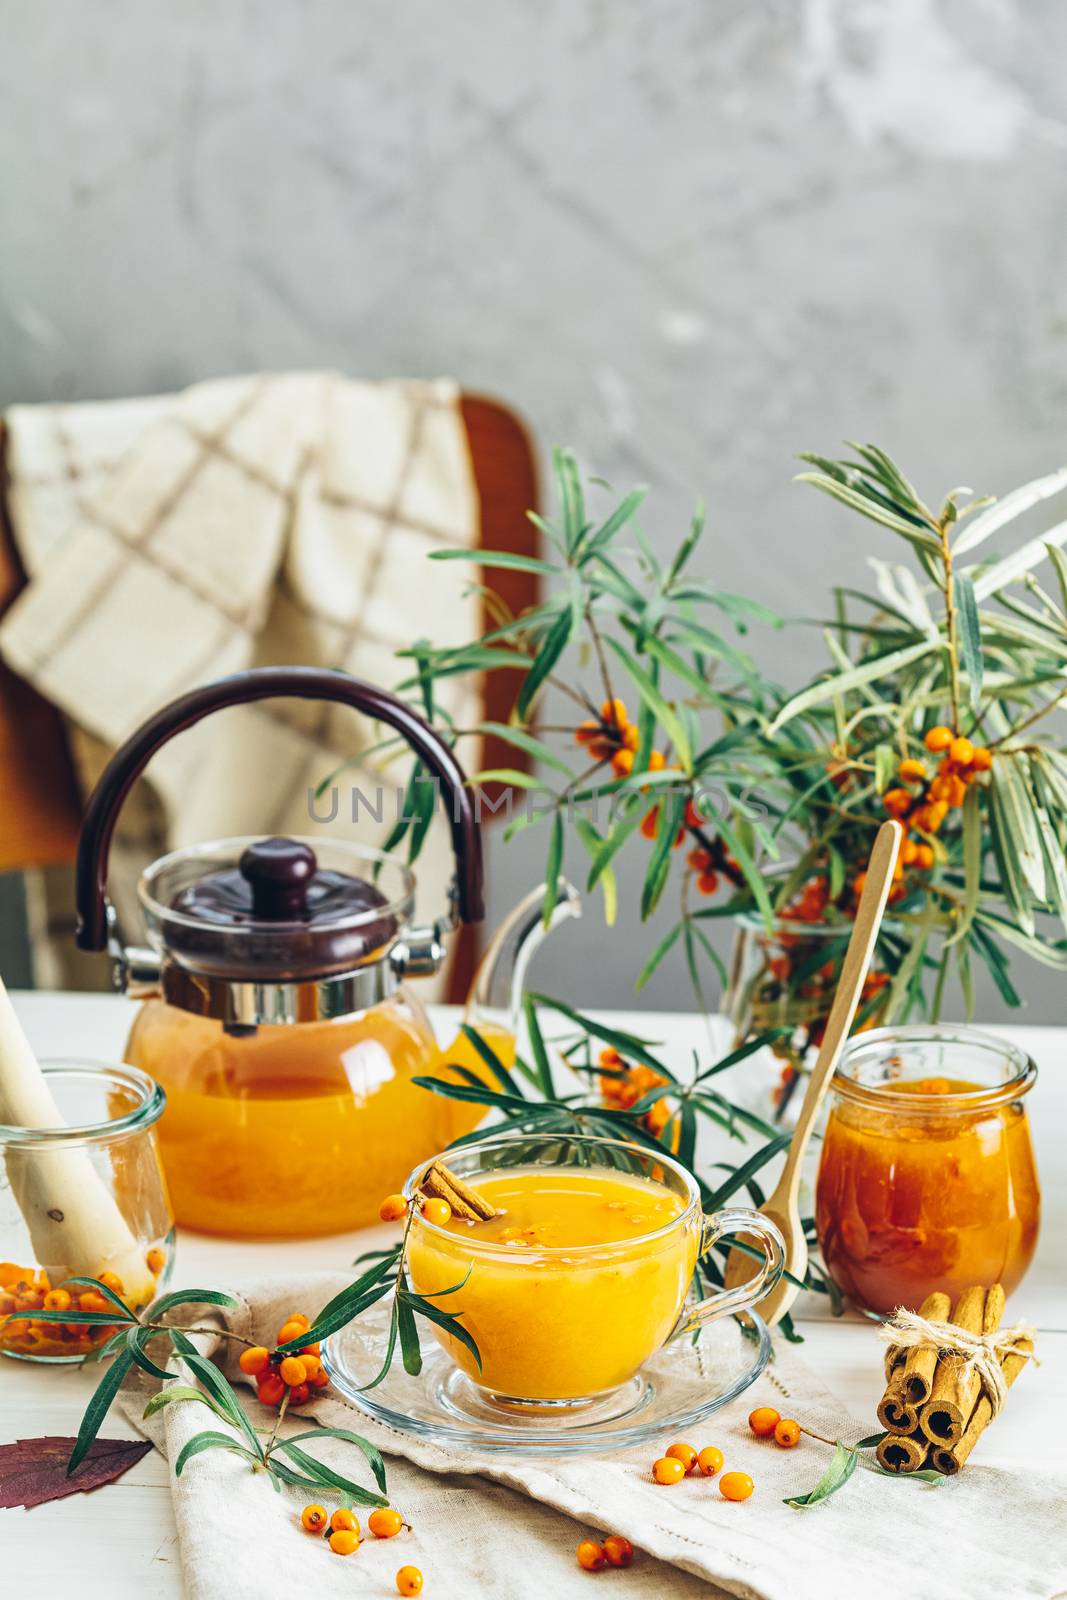 Cup and teapot of hot spicy tea with sea buckthorn, jam in the glass jar, branches of fresh berries on light woden table surface in the rustic room